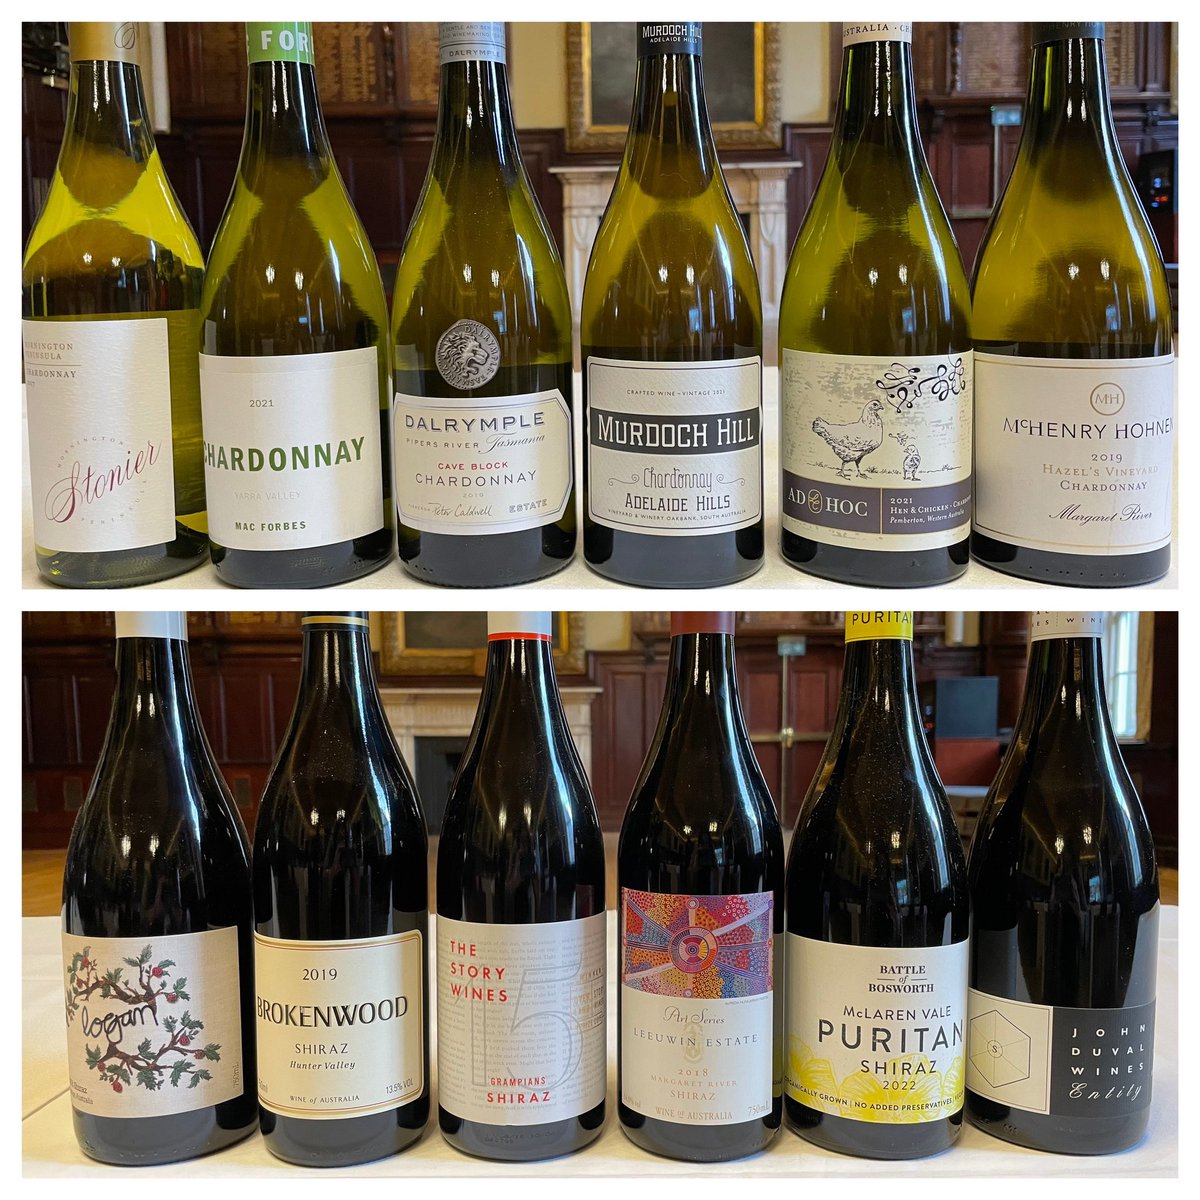 What a cracking line up for our Australian Chardonnay and Shiraz masterclass in Glasgow today. A total pleasure to present these alongside the lovely @winepages and lots of great feedback from the audience. On to Edinburgh now! #australianwinediscovered